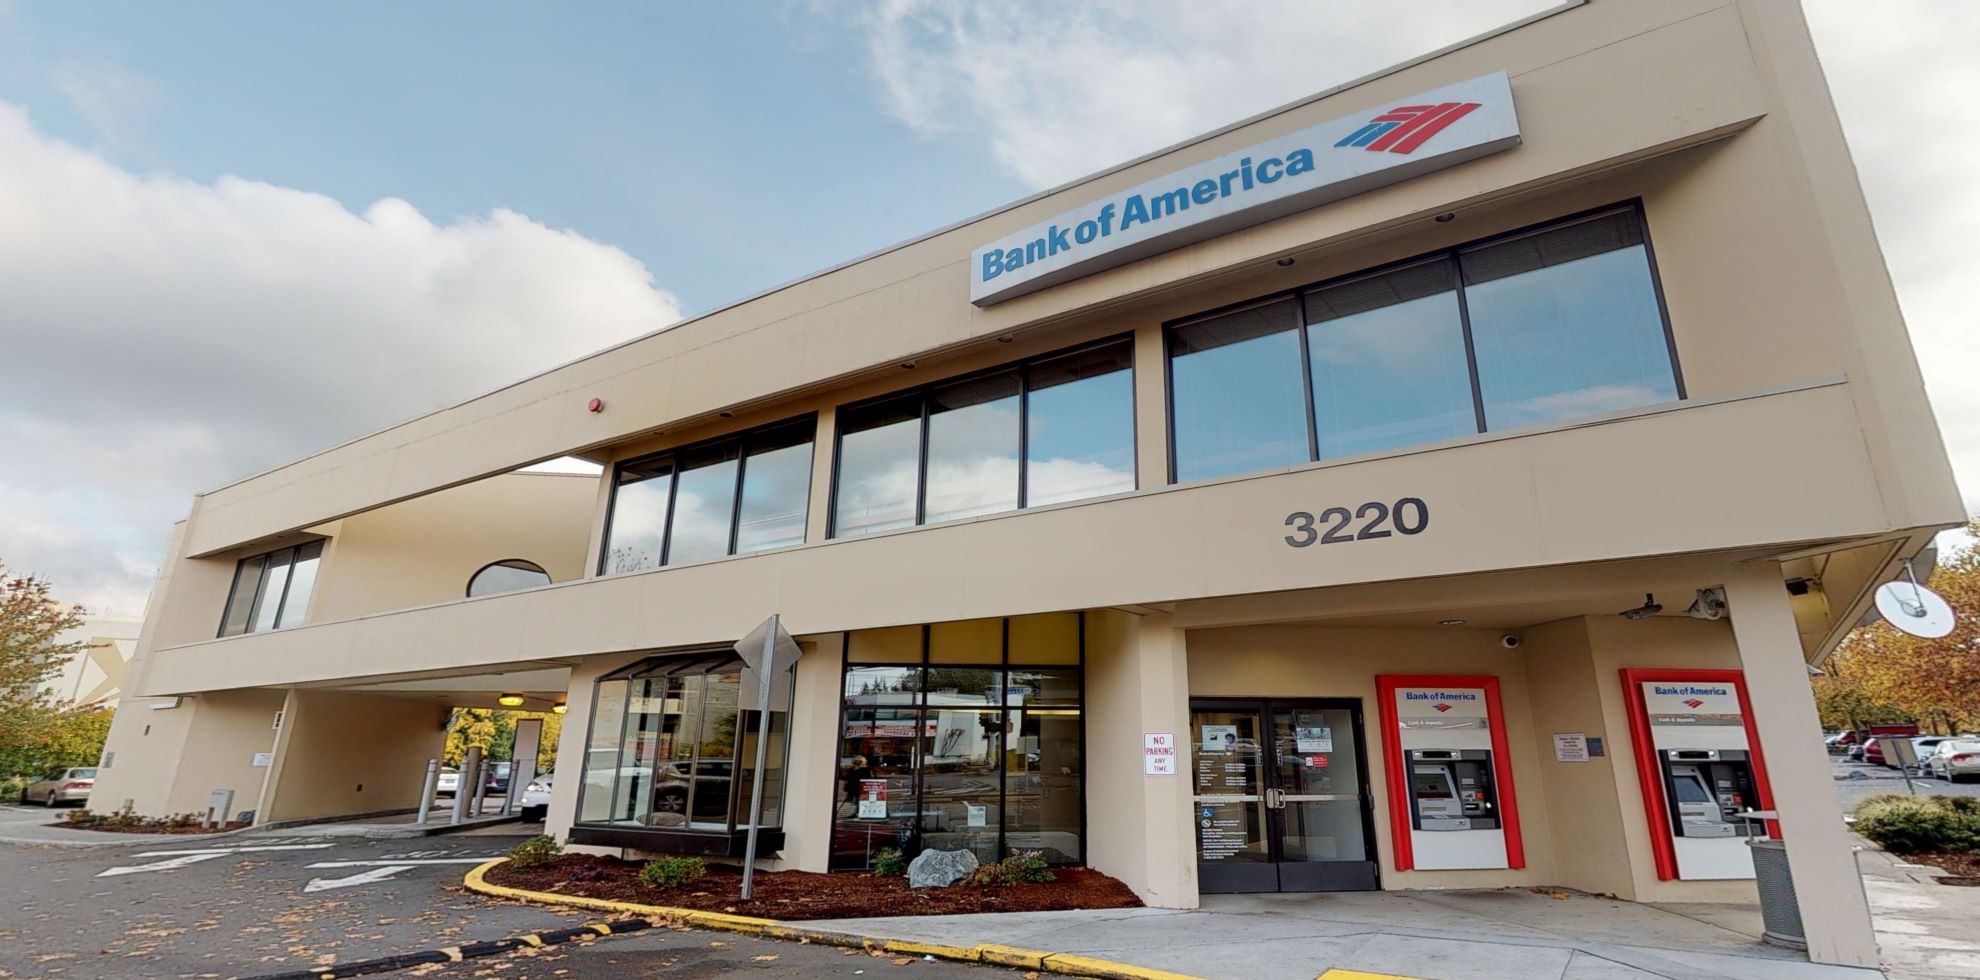 Bank of America financial center with drive-thru ATM and teller | 3220 188th St SW, Lynnwood, WA 98037